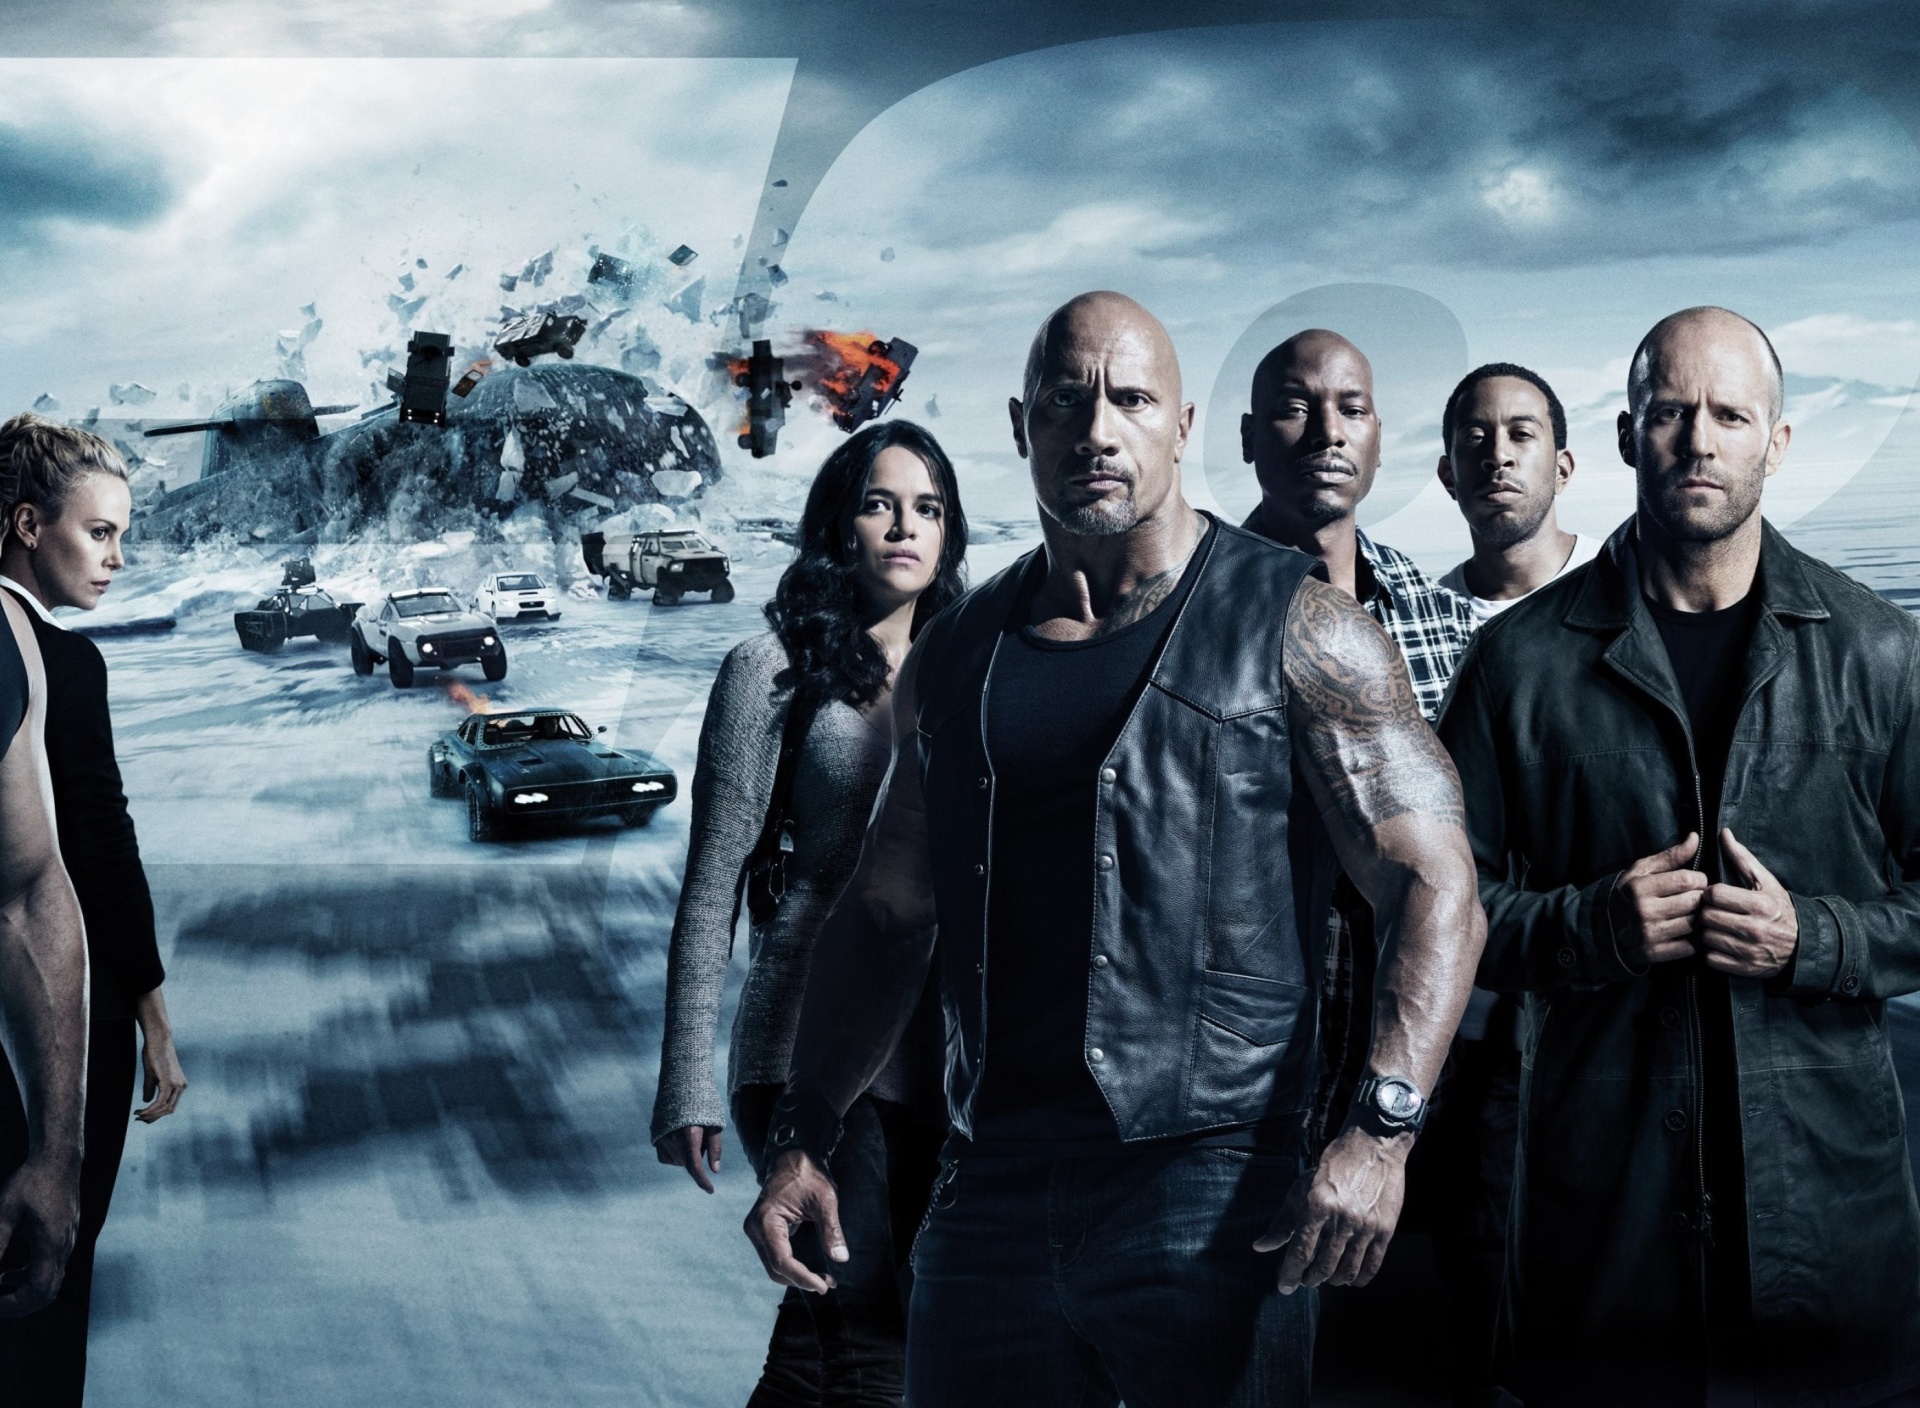 The Fate of the Furious with Vin Diesel, Dwayne Johnson, Charlize Theron wallpaper 1920x1408